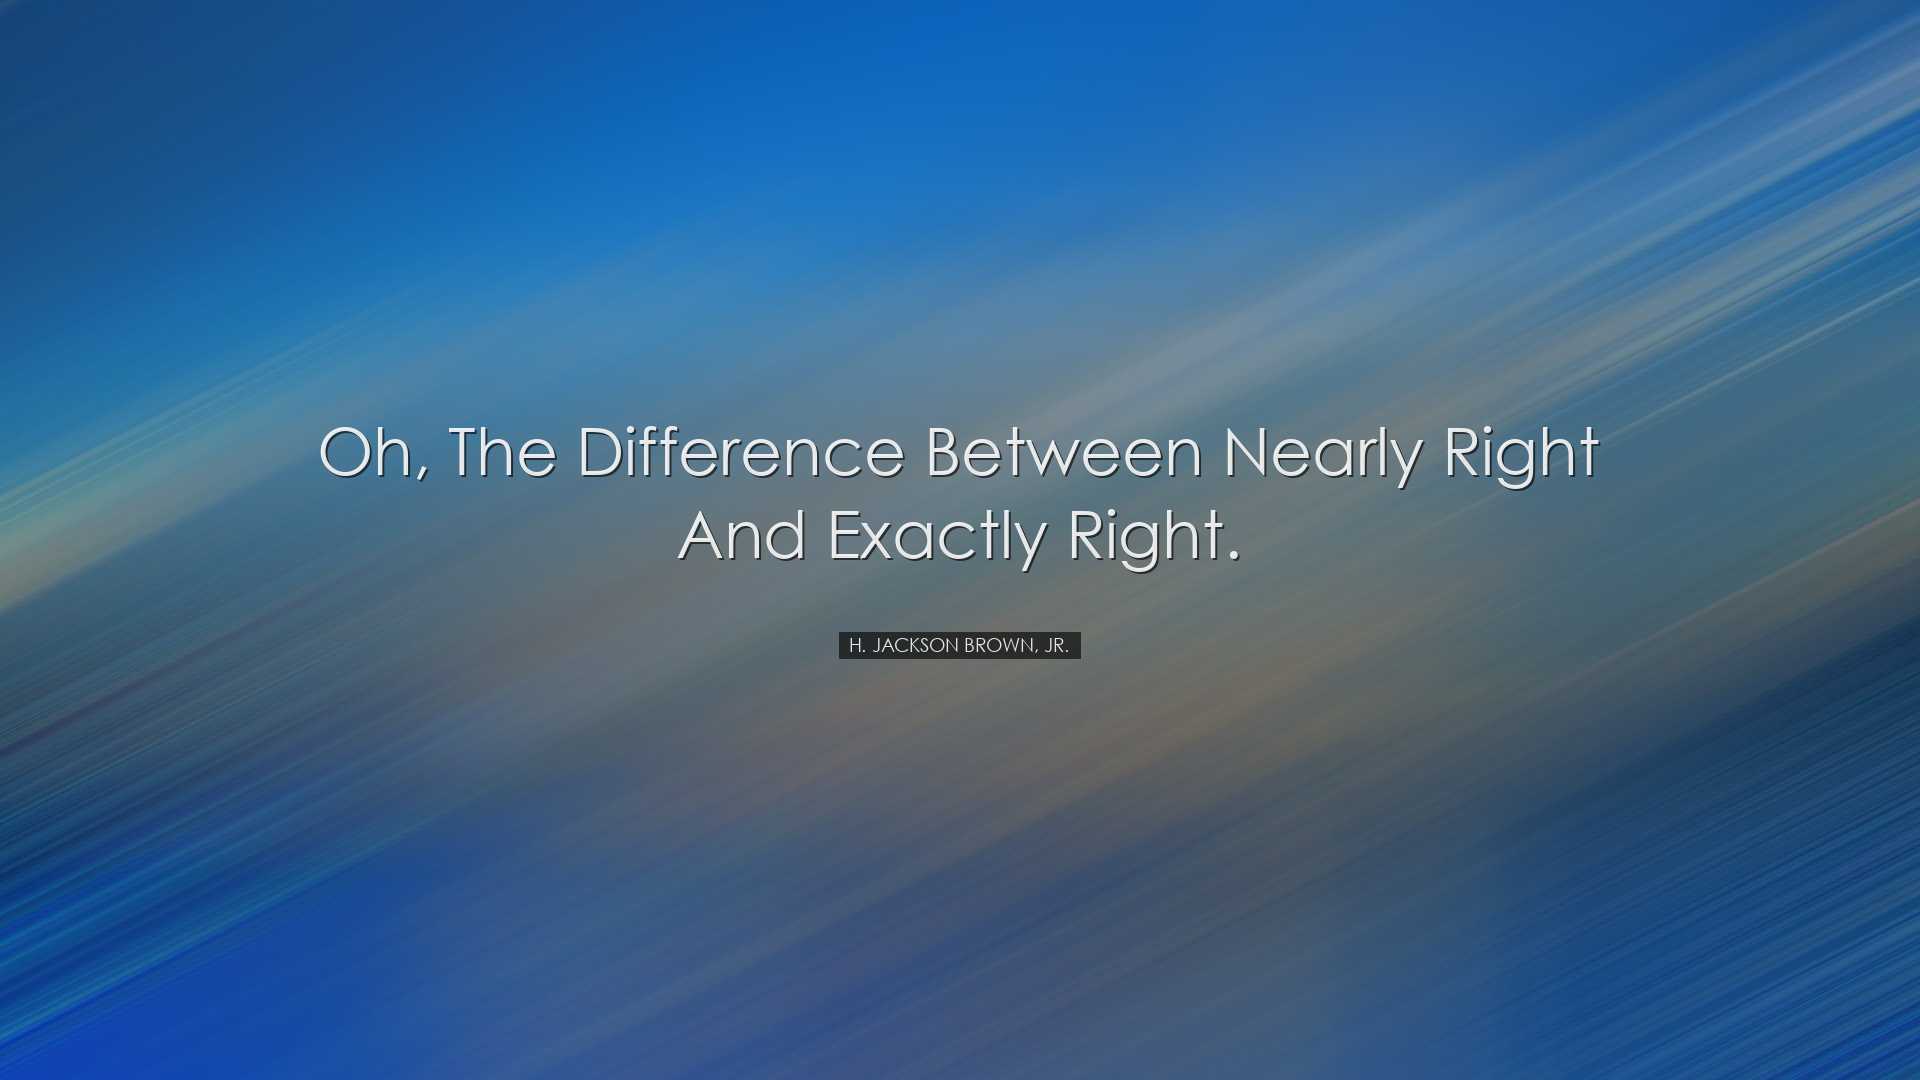 Oh, the difference between nearly right and exactly right. - H. Ja